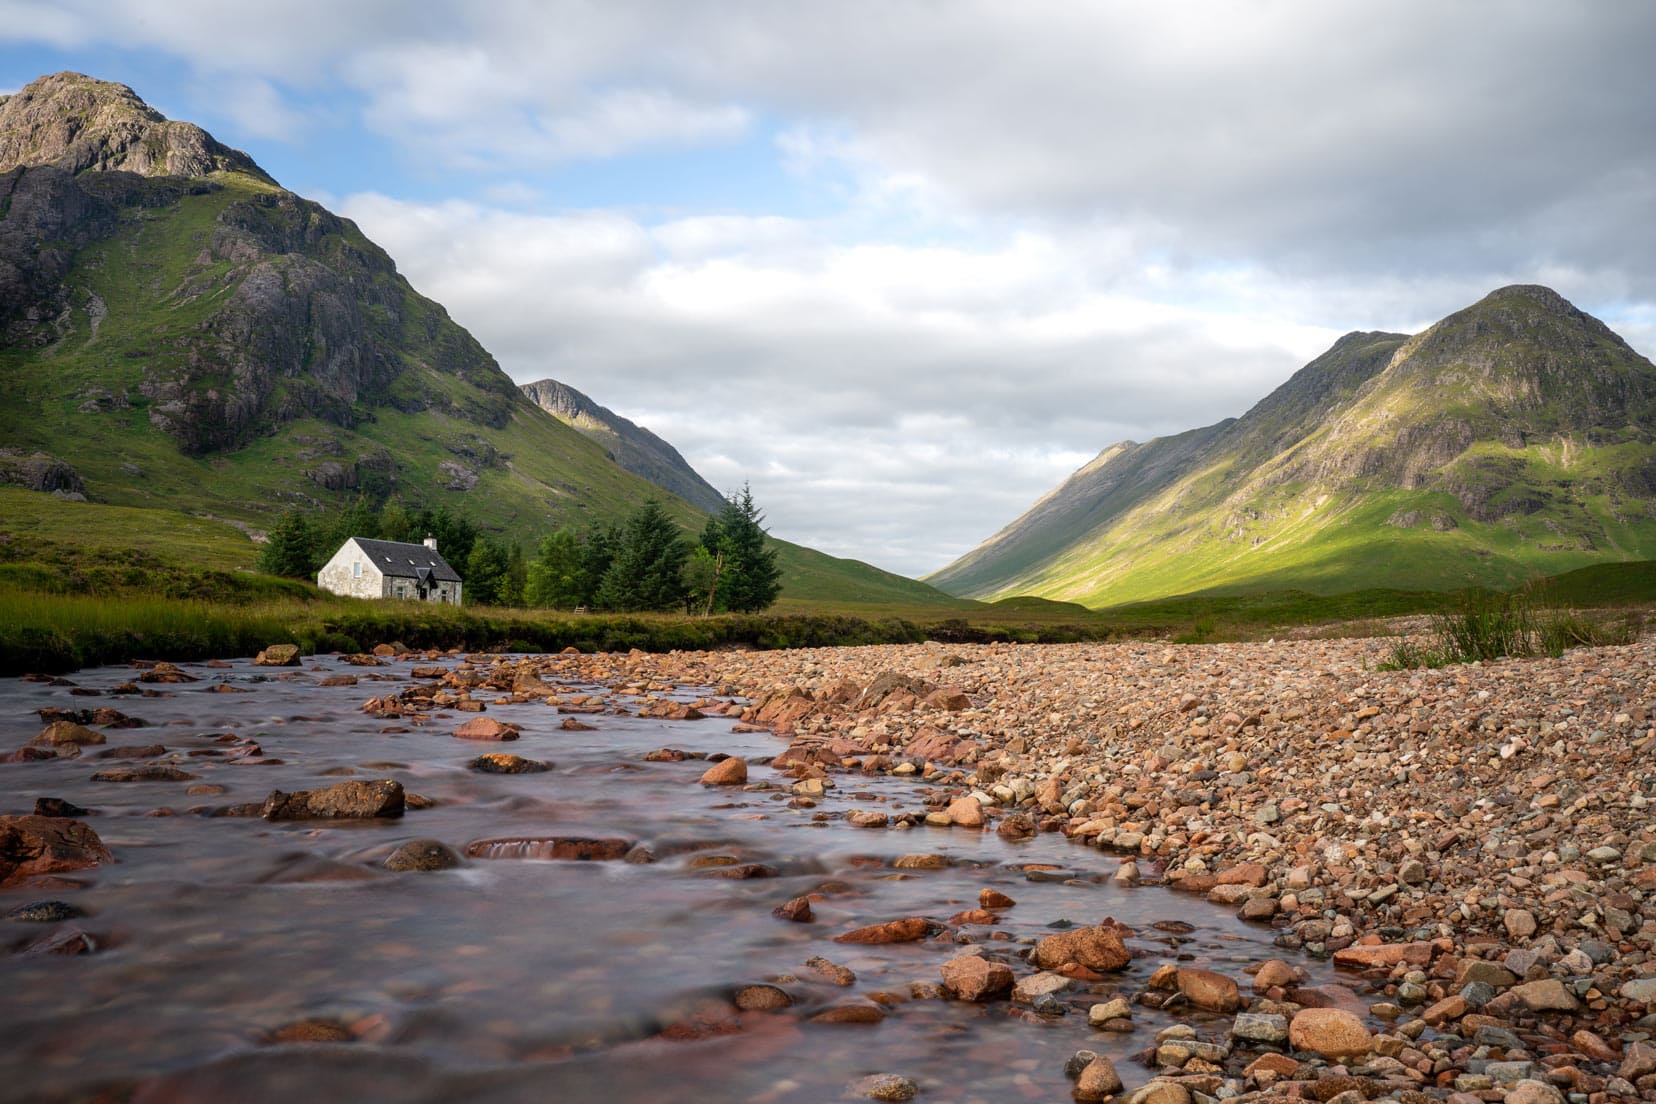 Glencoe long exposure with blurred river over brown pebbles and green mountains in the background